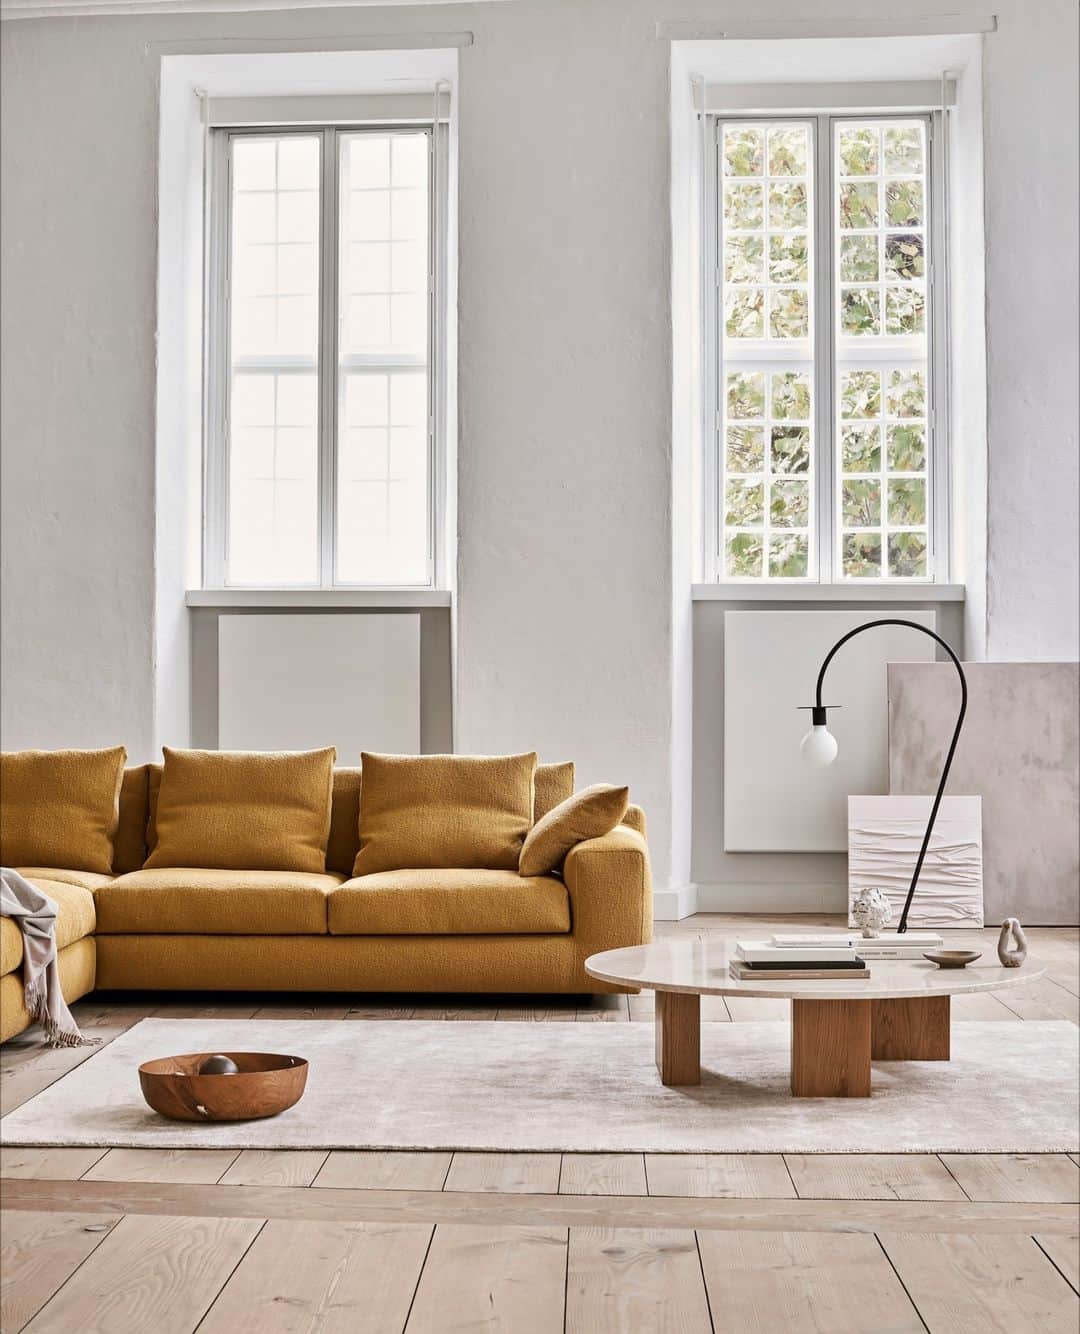 eilersenのインスタグラム：「Aton is a modern sofa that stands out with its soft, ample form. The sofa clearly carries Eilersen’s DNA in its well-proportioned design that combines a sense of spaciousness with the option of scaling the sofa to match many different types of rooms and homes.⁠ ⁠ Aton has a unique aura – just like the Egyptian sun god that the sofa is named after. And the comfort is nothing short of divine.⁠ ⁠ The sofa was designed by Jens Juul Eilersen who aimed for a soft, rounded sofa with a modern, classic feel.⁠ ⁠ ⁠ ⁠ Sofa: Aton upholstered in Wave 38⁠ Table: Puzz⁠ Carpet: Stick by Eilersen in colour Sand⁠ ⁠ ⁠ ⁠ ⁠ #eilersen #eilersenfurniture #myeilersen #enjoyaneilersen #Aton #jensjuuleilersen #homedecor #sofa #danishdesign #inredning #finahem #interiorlovers #interiordesign #modernliving #minimalism #nordiskehjem #nordicinspiration #nordicliving #craftsmanship #boligindretning #designinterior #livingroominspo #boliginspiration  #hemindredning #schönerwohnen #nordicminimalism #designinspiration #throughgenerations」